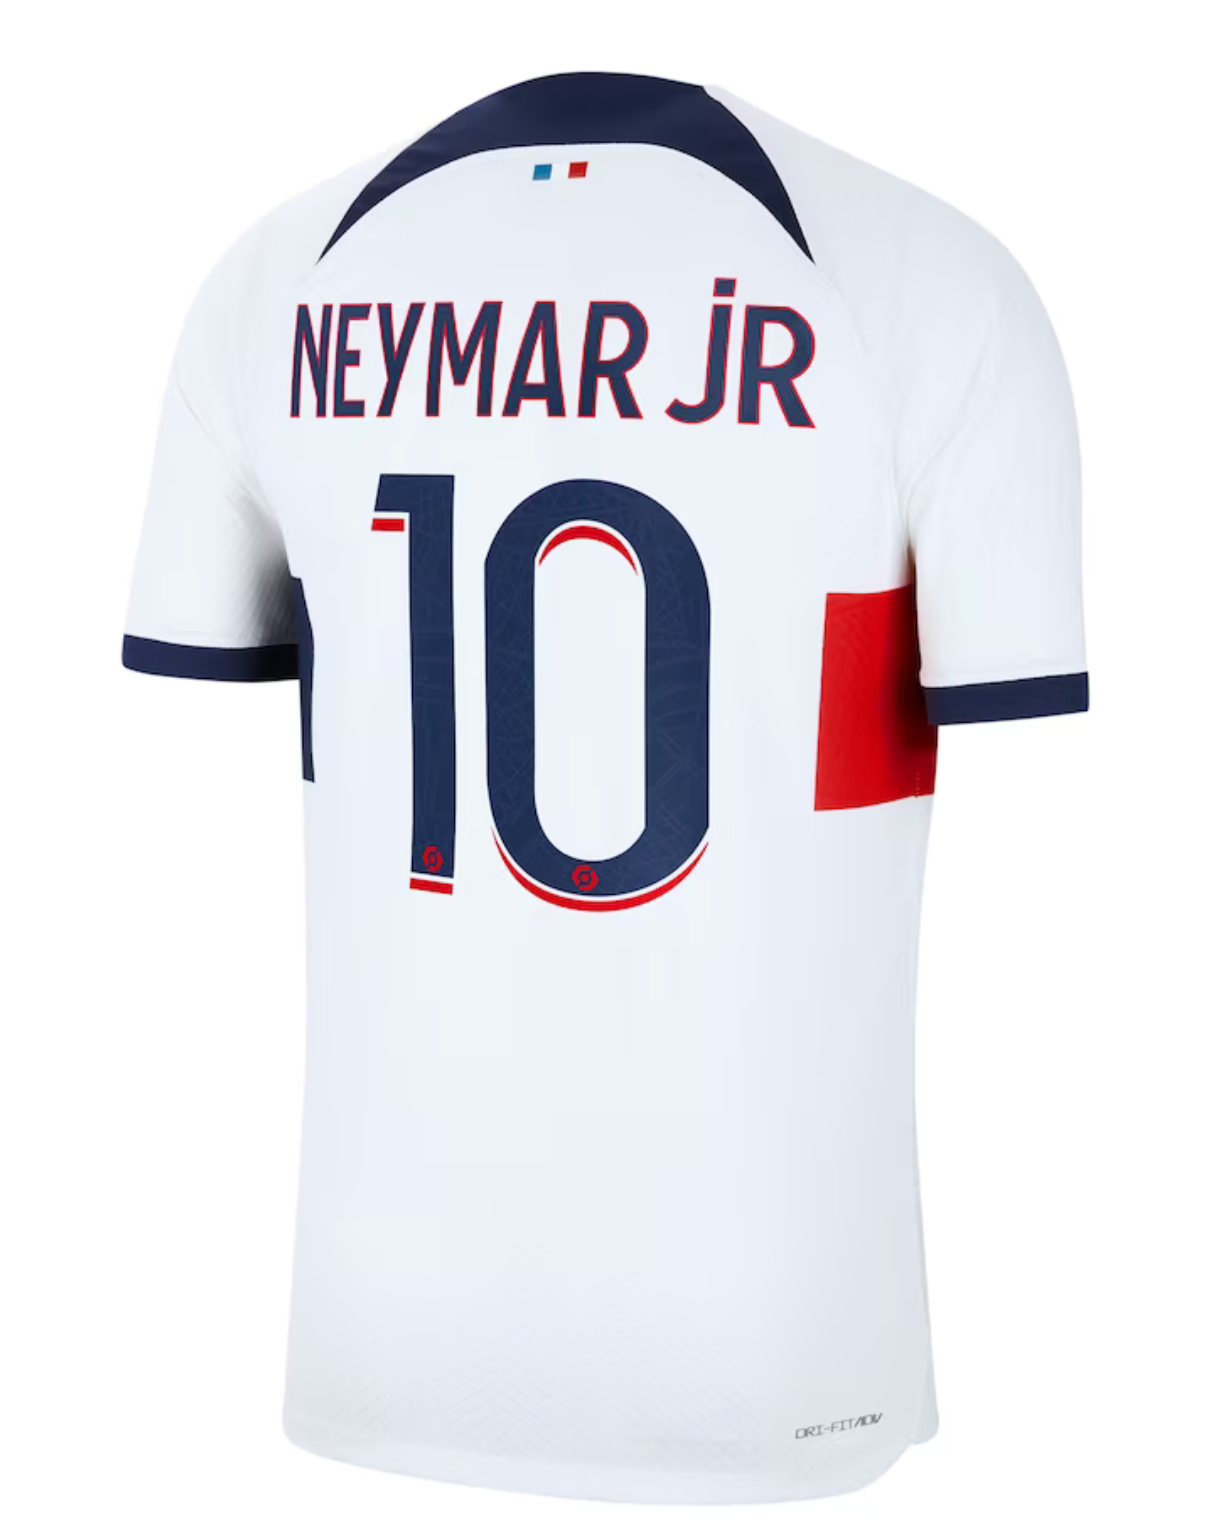 PSG 23/24 Authentic Third Jersey by Nike - Size S